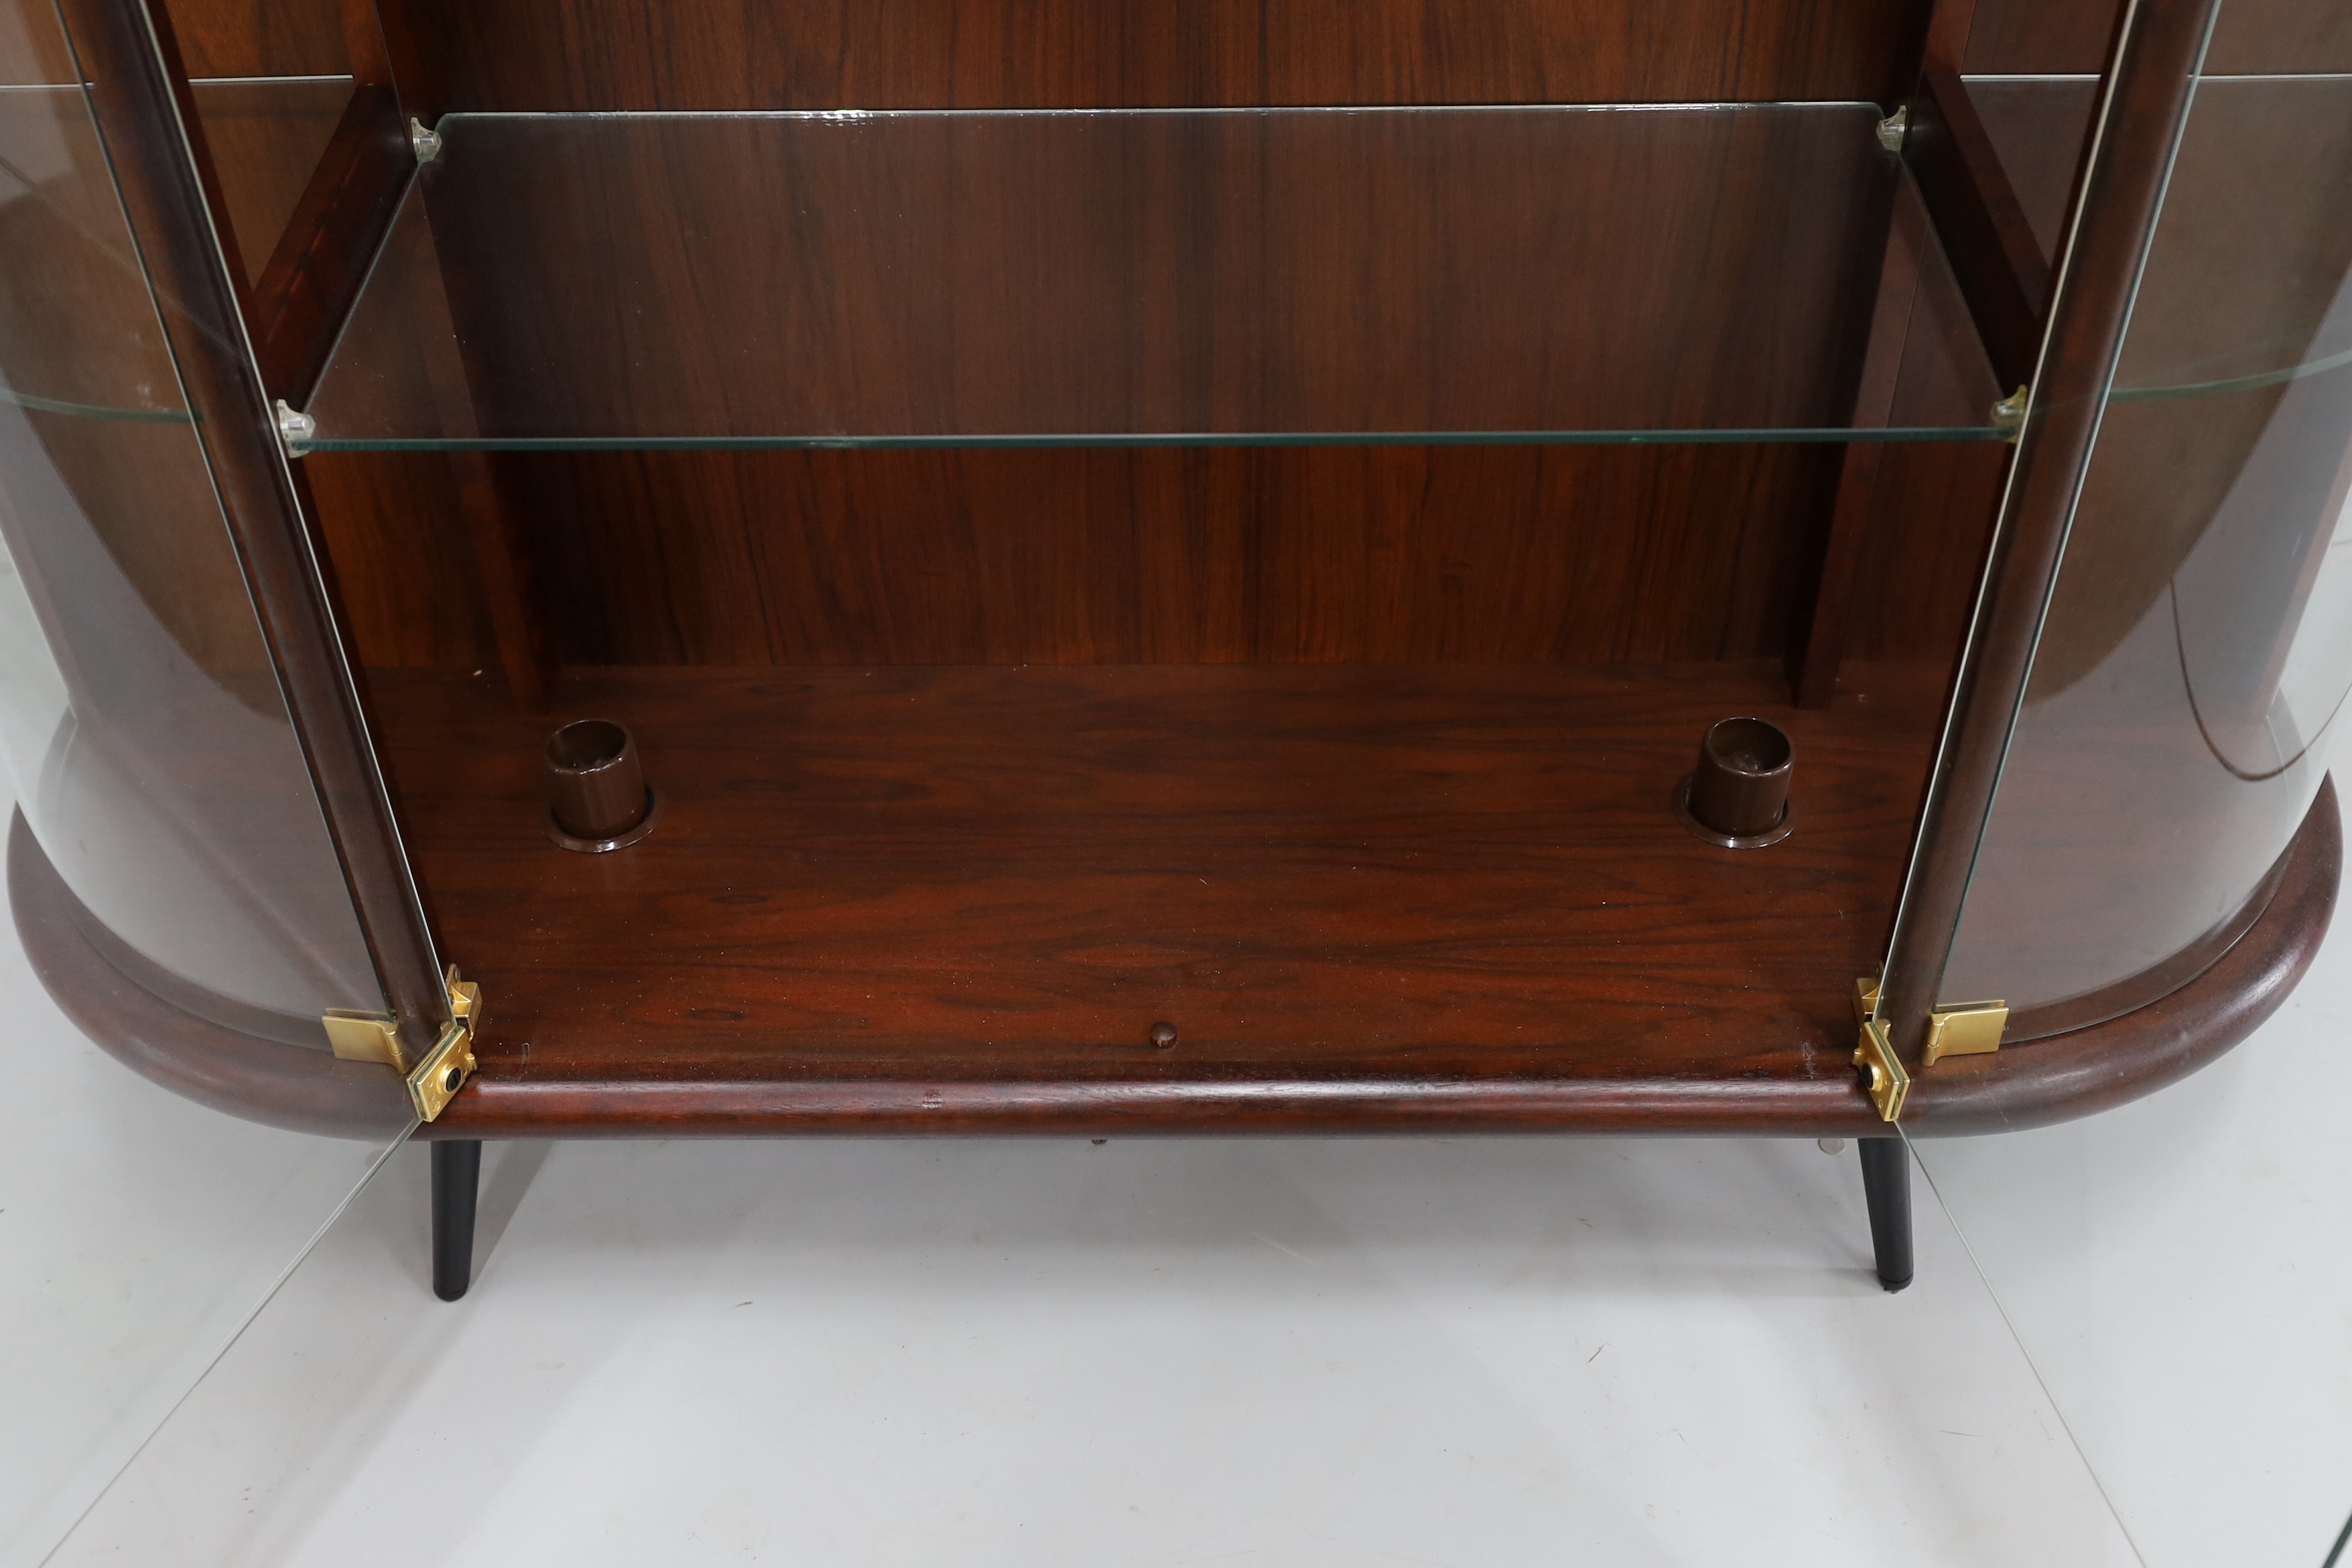 A mid century Indian rosewood glazed display cabinet with lighting, width 133cm, depth 36cm, height 130cm